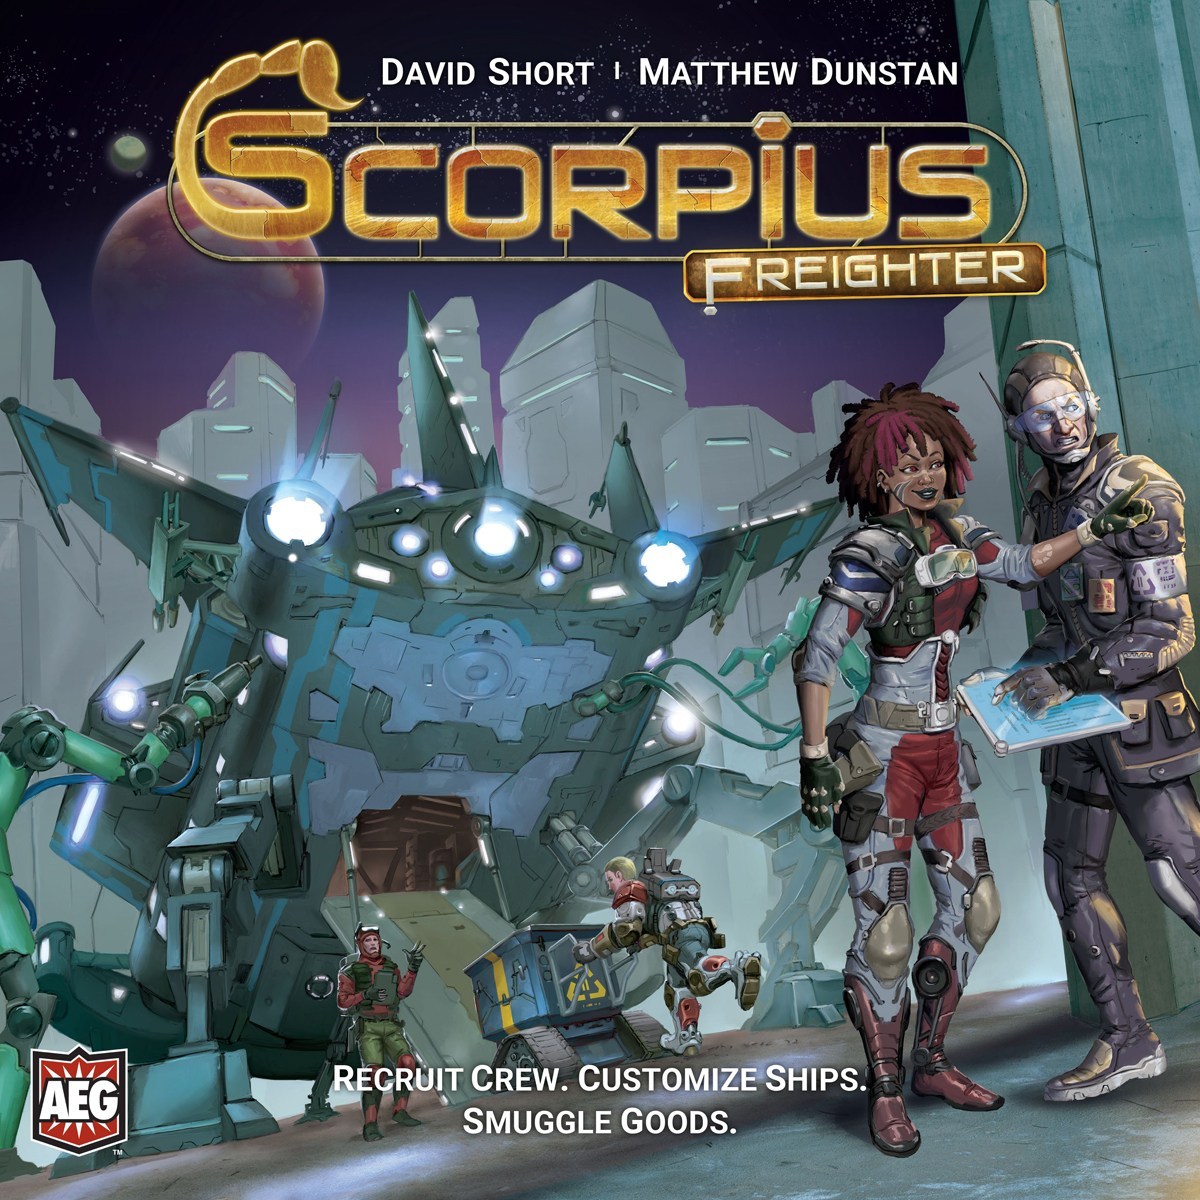 Scorpius Freighter cover